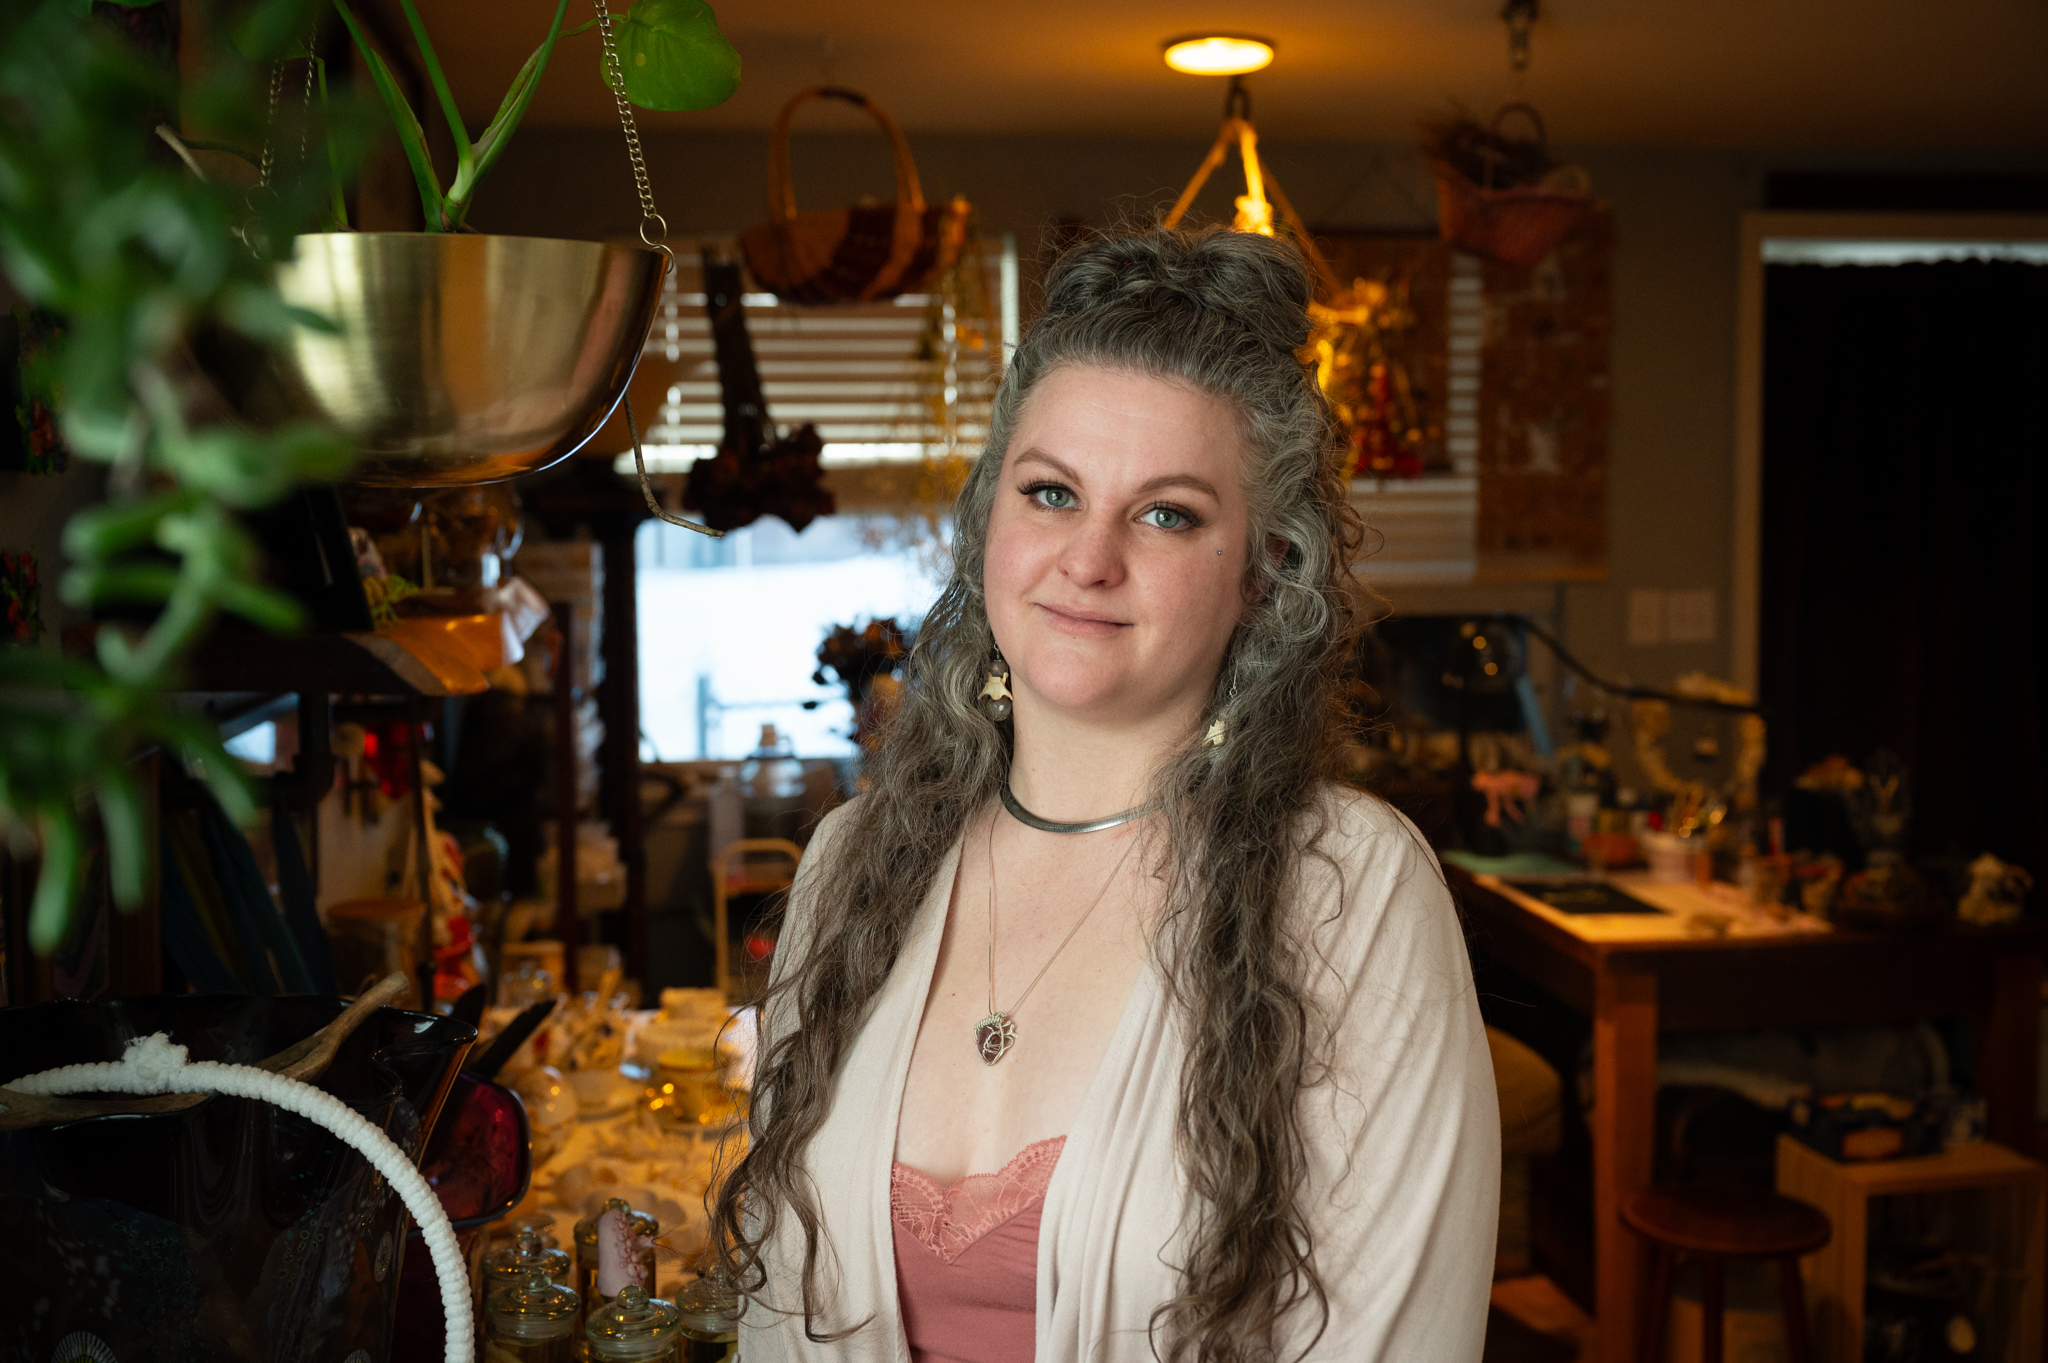 Woman with long hair stands in a room cluttered with plants and others things